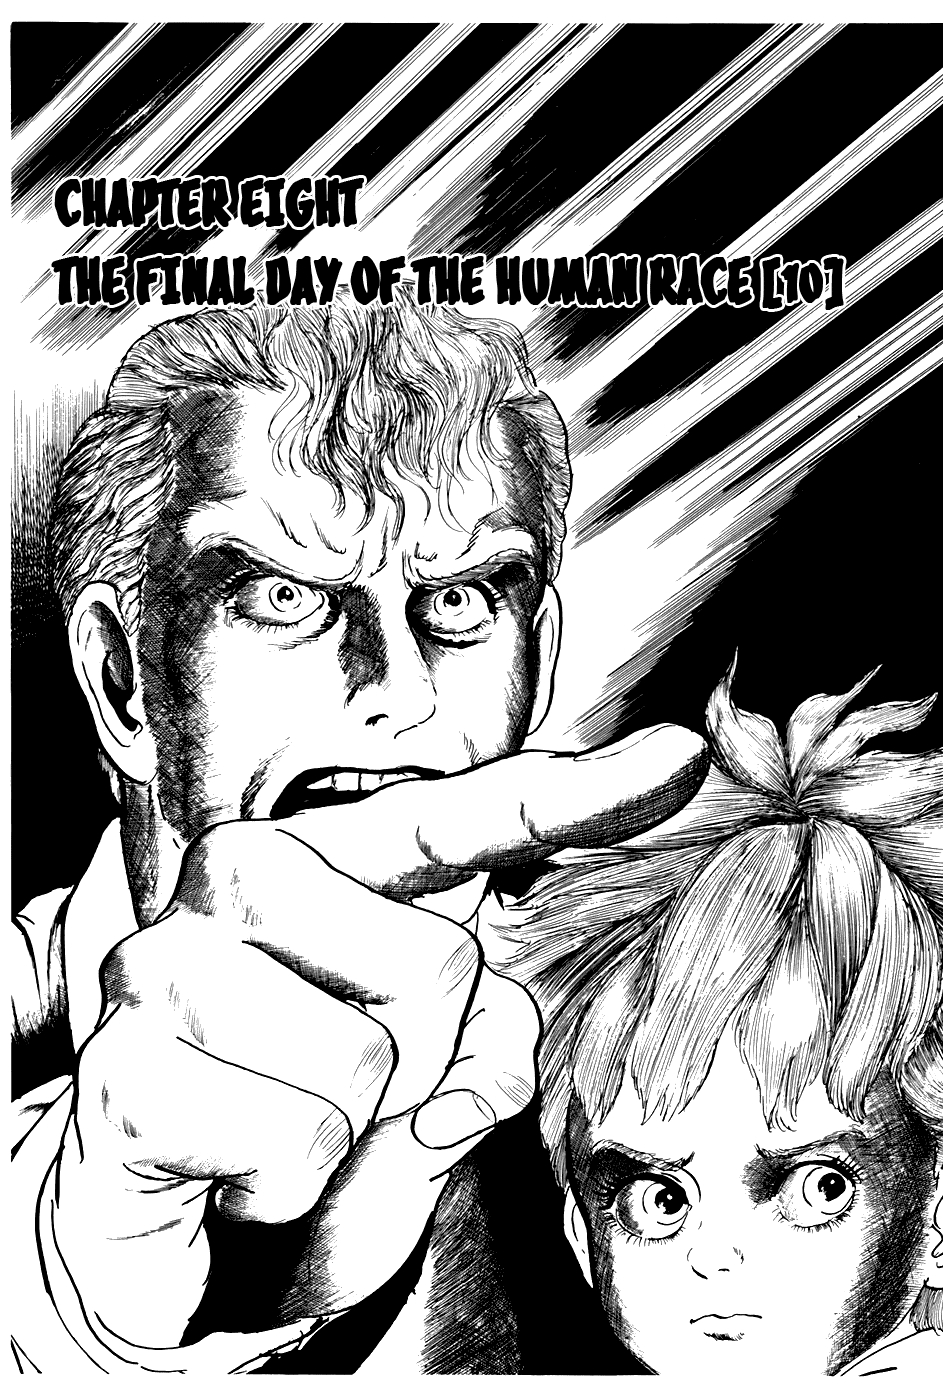 Fourteen Vol. 12 Ch. 225 The Final Day of the Human Race (10)